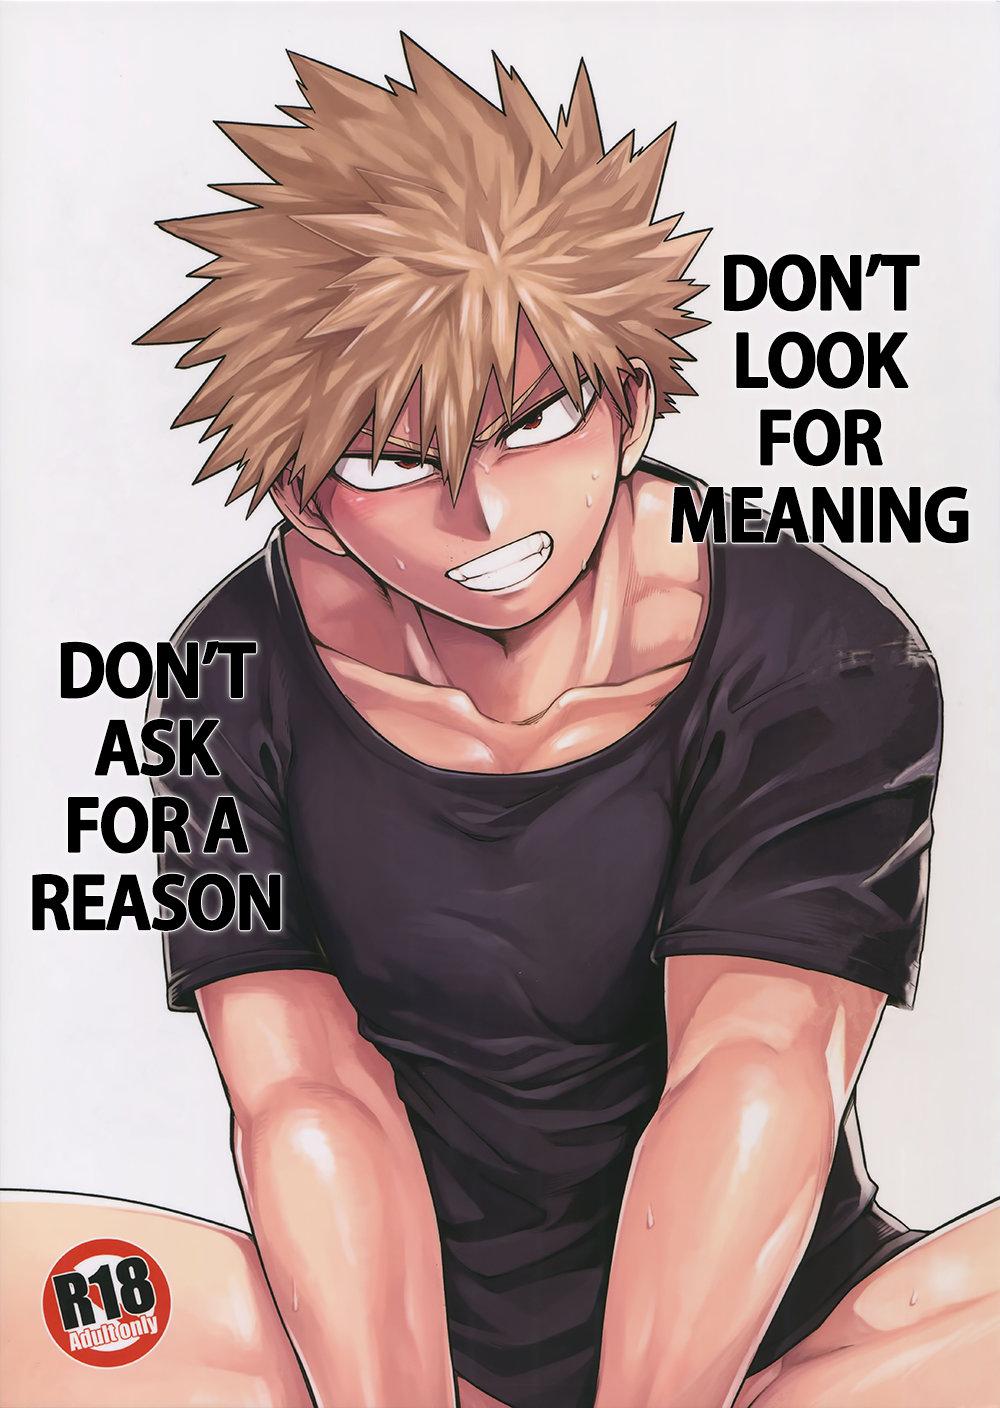 Tiny Imi o Sasuna Riyuu o Touna | Don't Look for Meaning, Don't Ask for a Reason - My hero academia Best Blowjob - Page 1